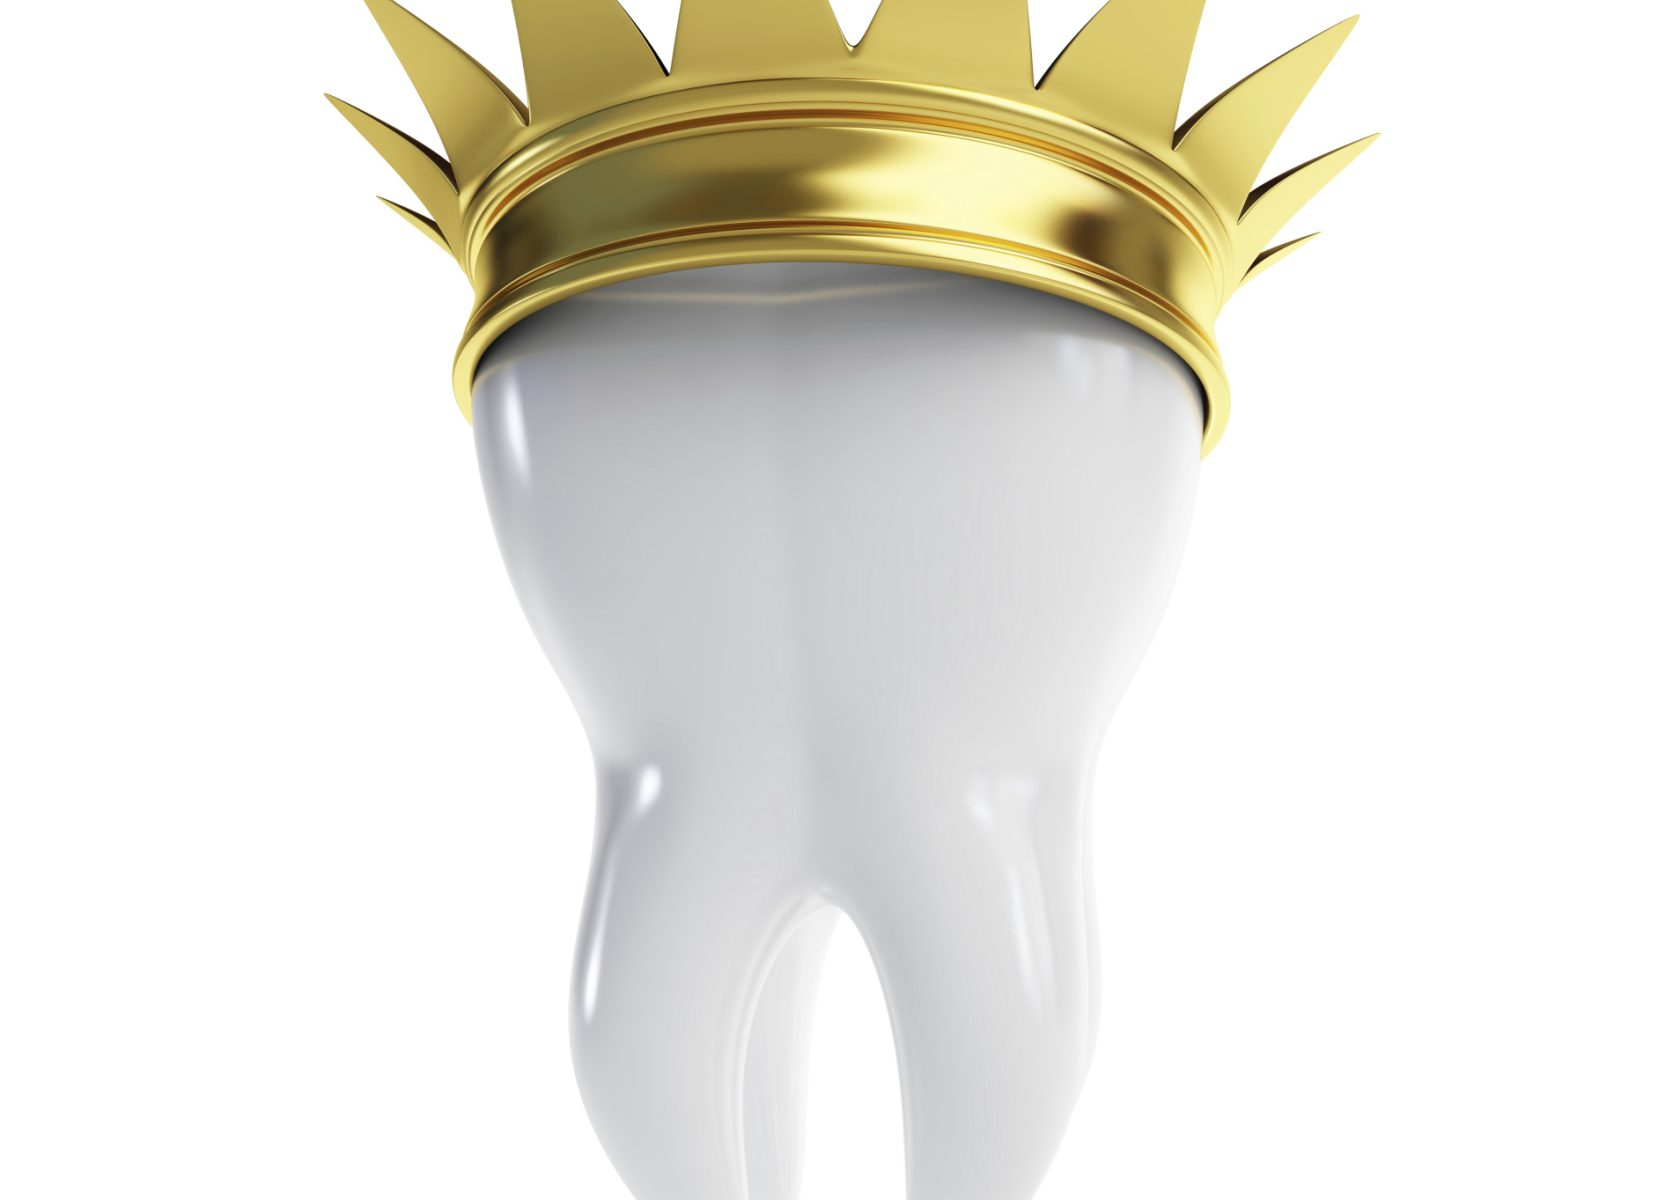 A tooth with a royal crown to depict dental crowns